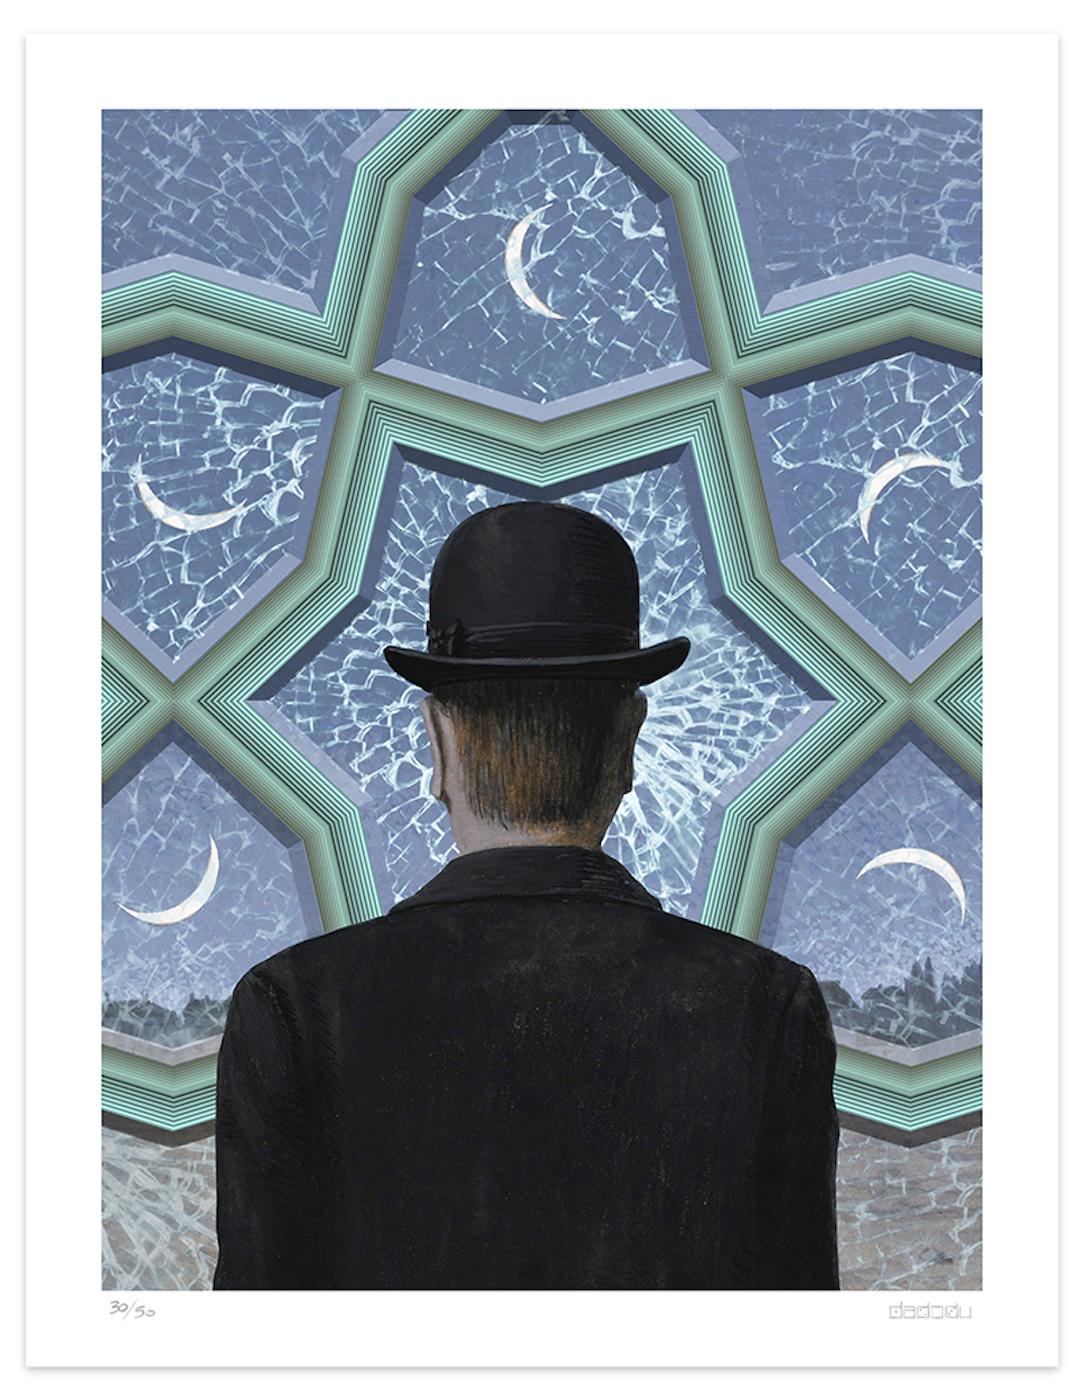 Image dimensions: 65 x 48.4 cm.

Derby is a splendid giclée print realized by the contemporary group of artists Dadodu in 2011.

This original artwork is a contemporary interpretation of the famous artwork Decalcomanie by René Magritte.

Hand-signed